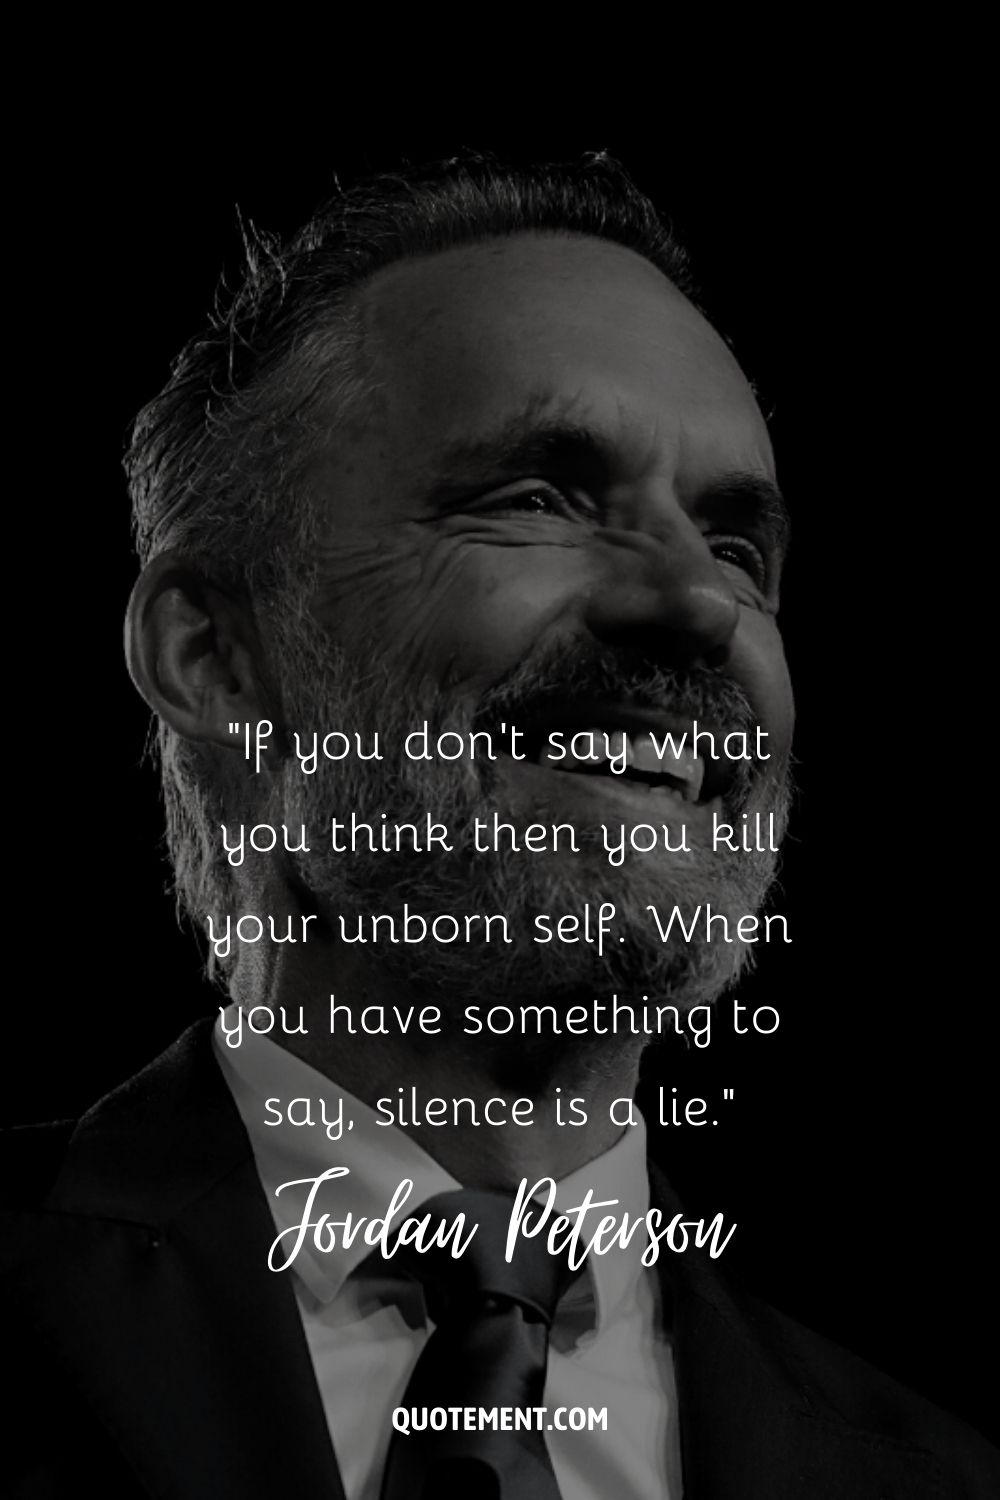 1. “If you don’t say what you think then you kill your unborn self. When you have something to say, silence is a lie.” — Jordan Peterson